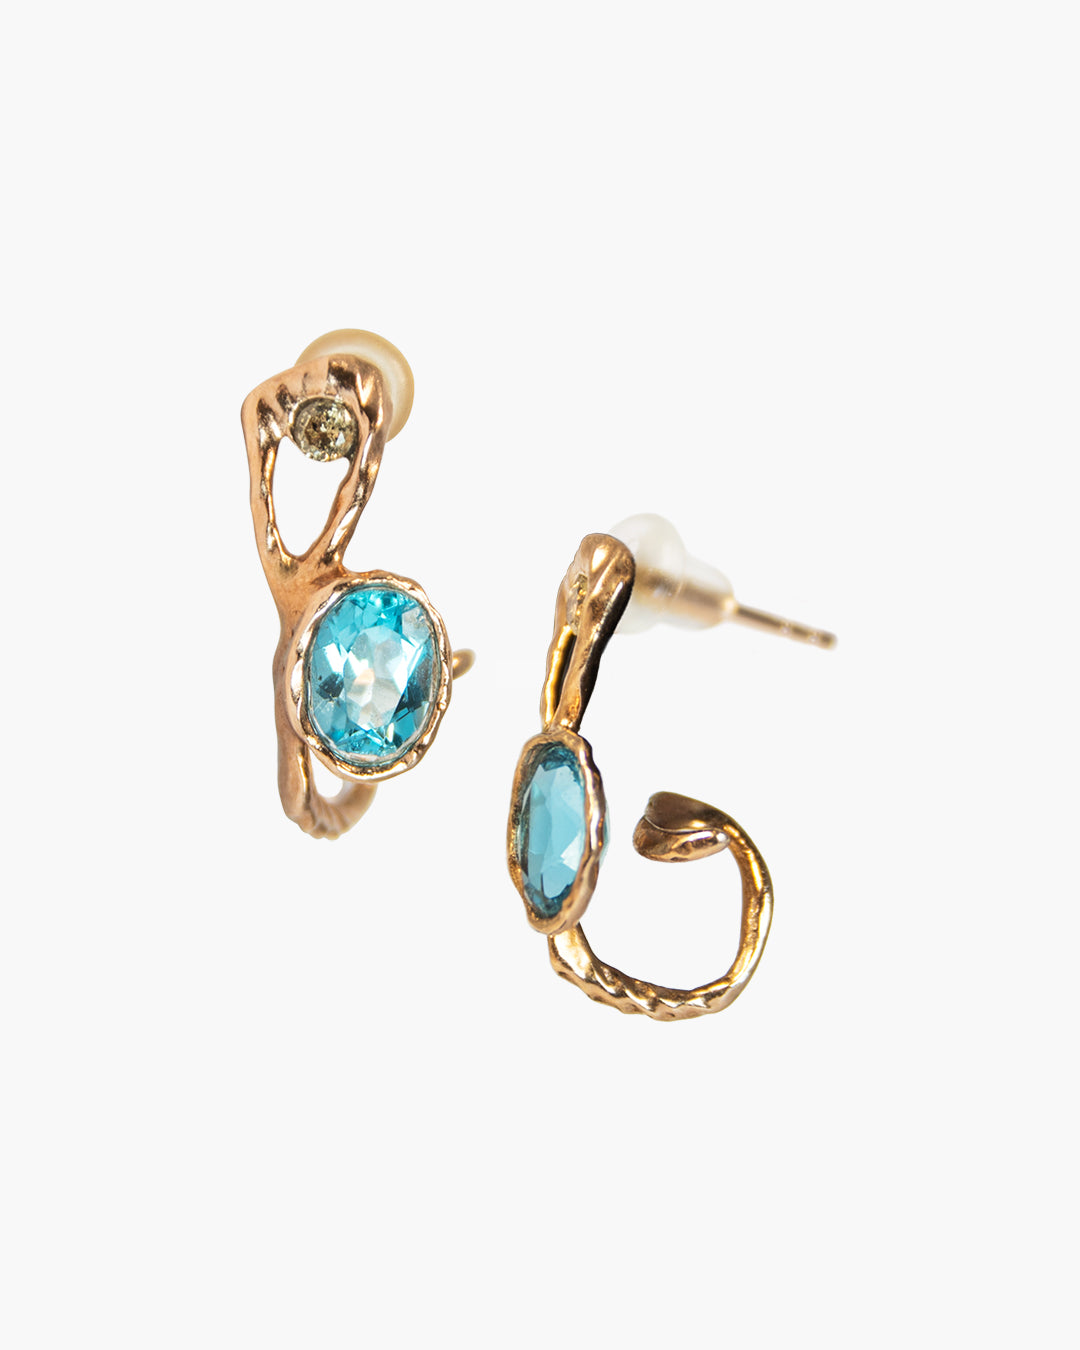 Signature Earring Pins with Blue Topaz and Dusty Diamonds